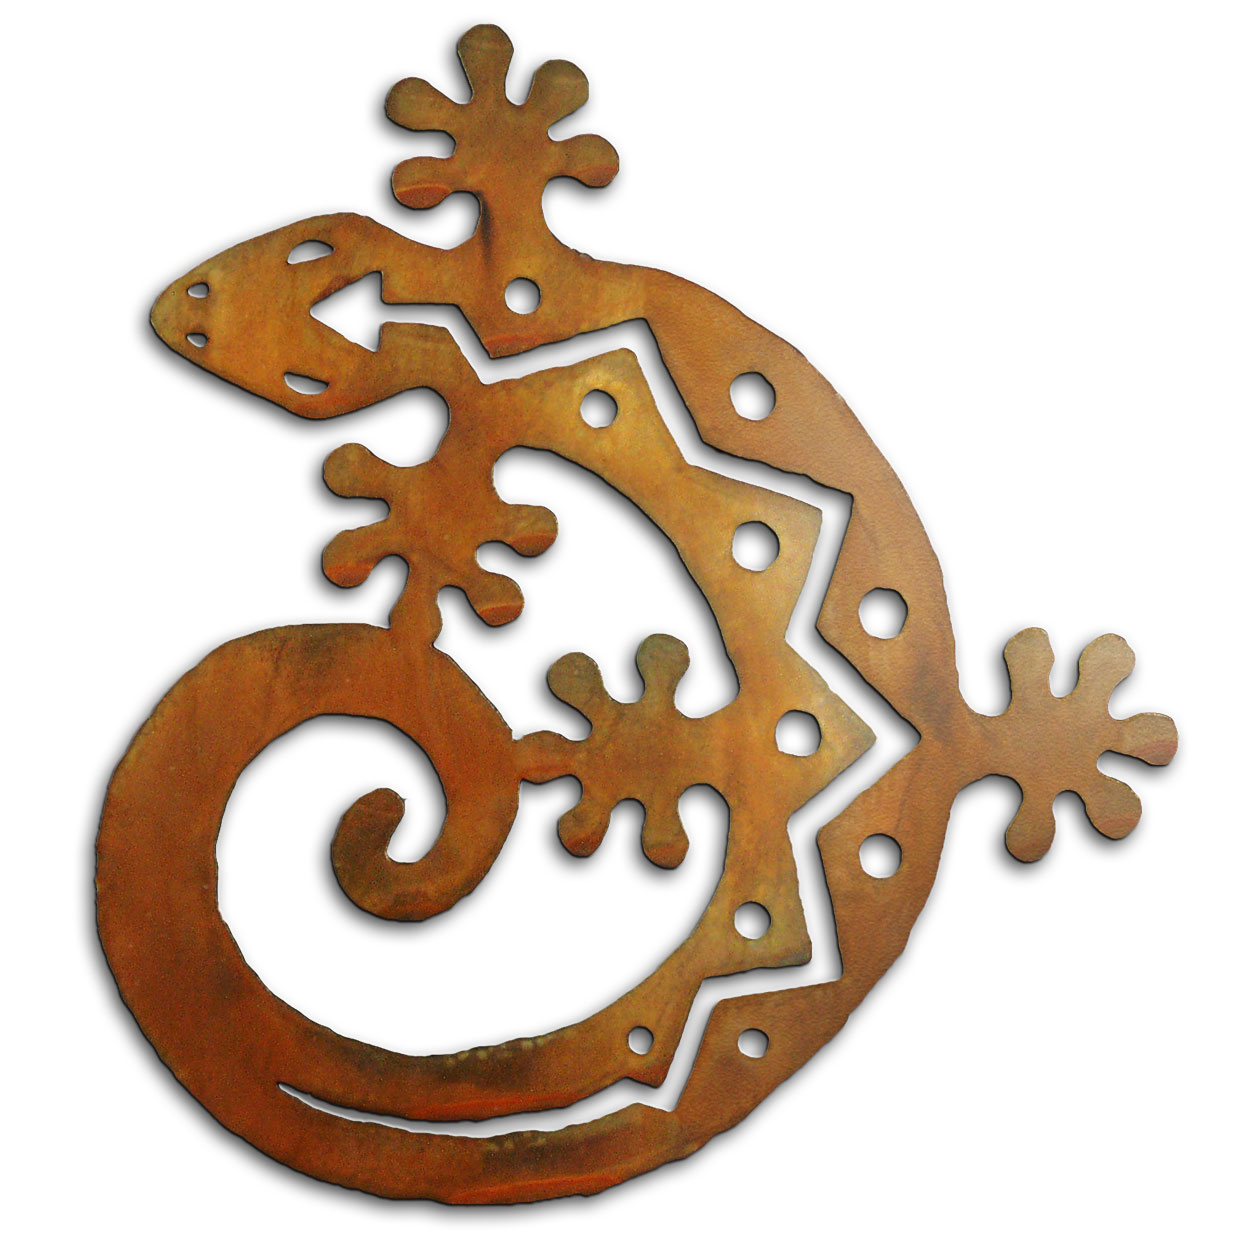 165174 - 30-inch extra large C-Shaped Gecko 3D Metal Wall Art in a rich rust finish